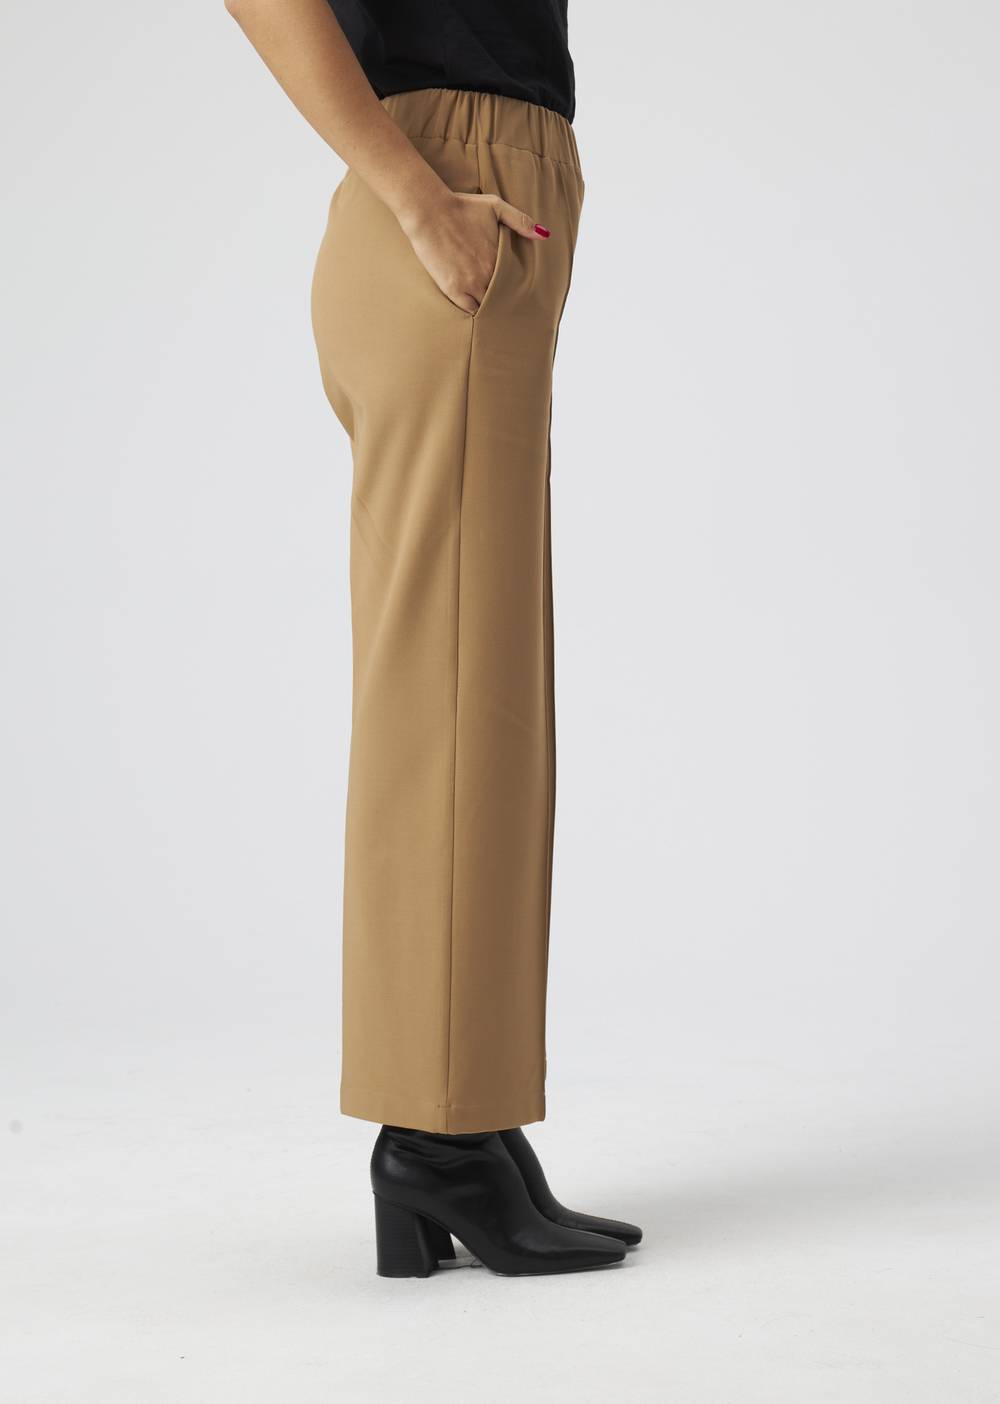 TROUSERS | XL | BROWN